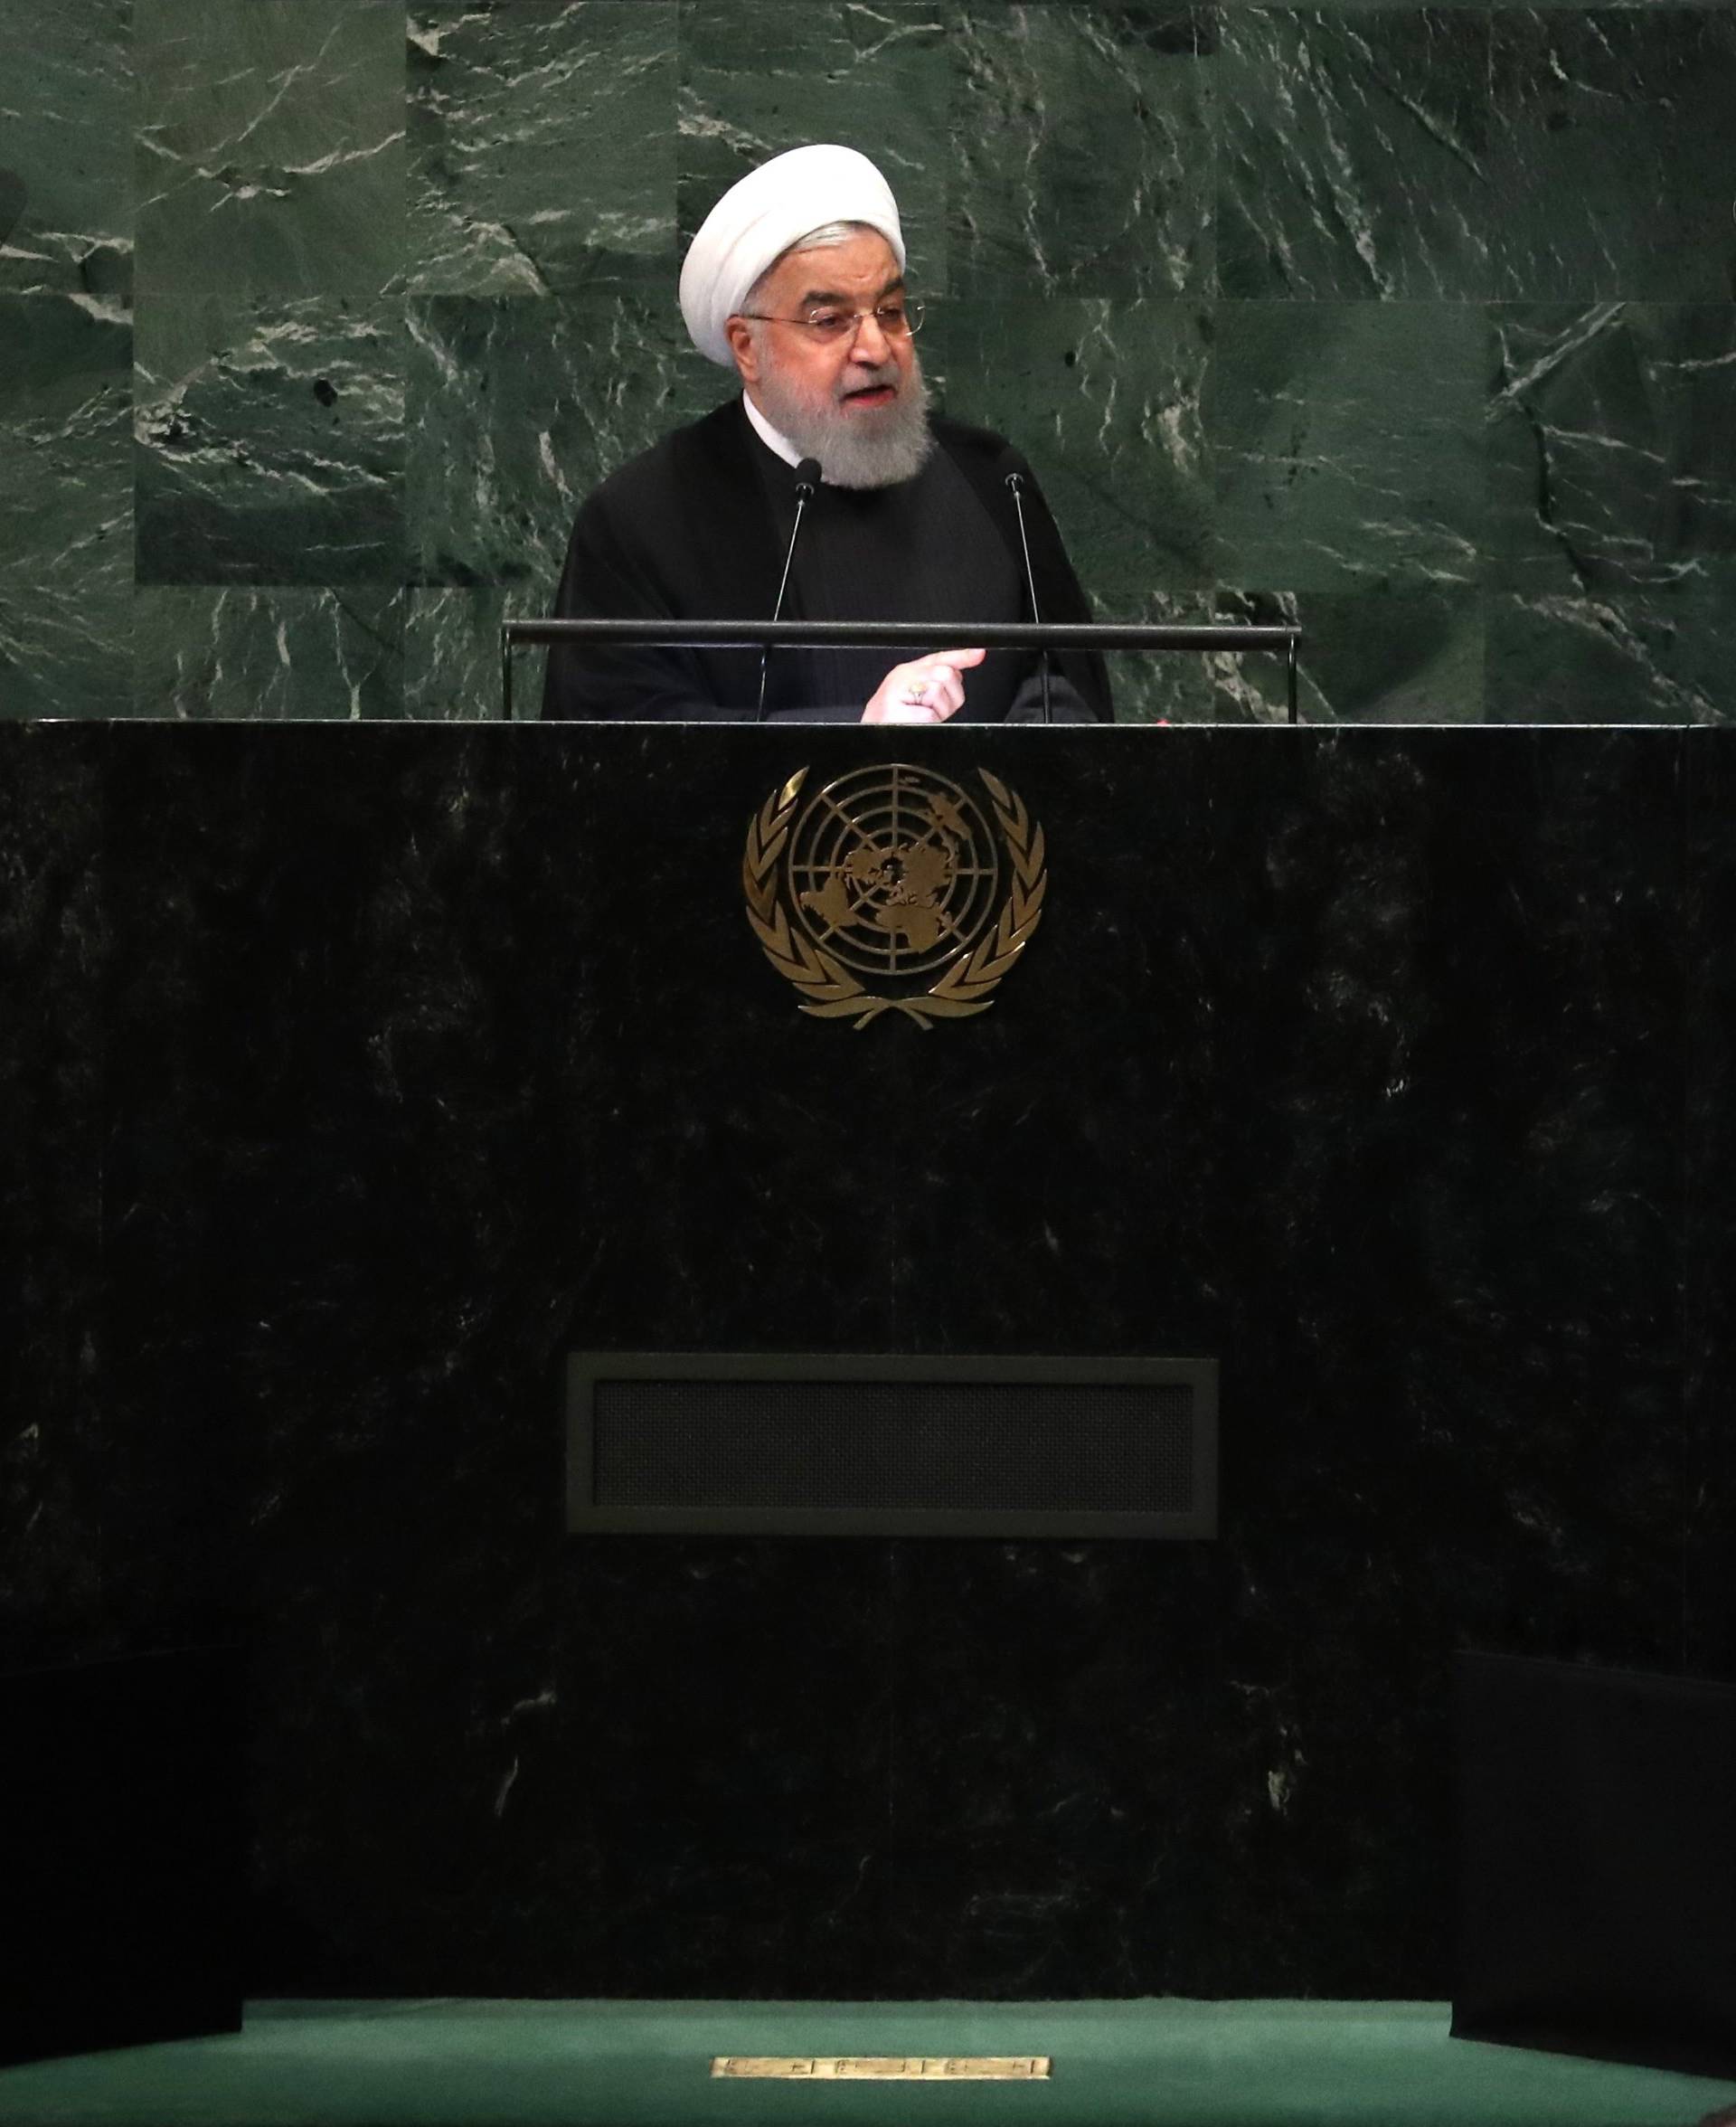 Iran's President Hassan Rouhani addresses the United Nations General Assembly in New York